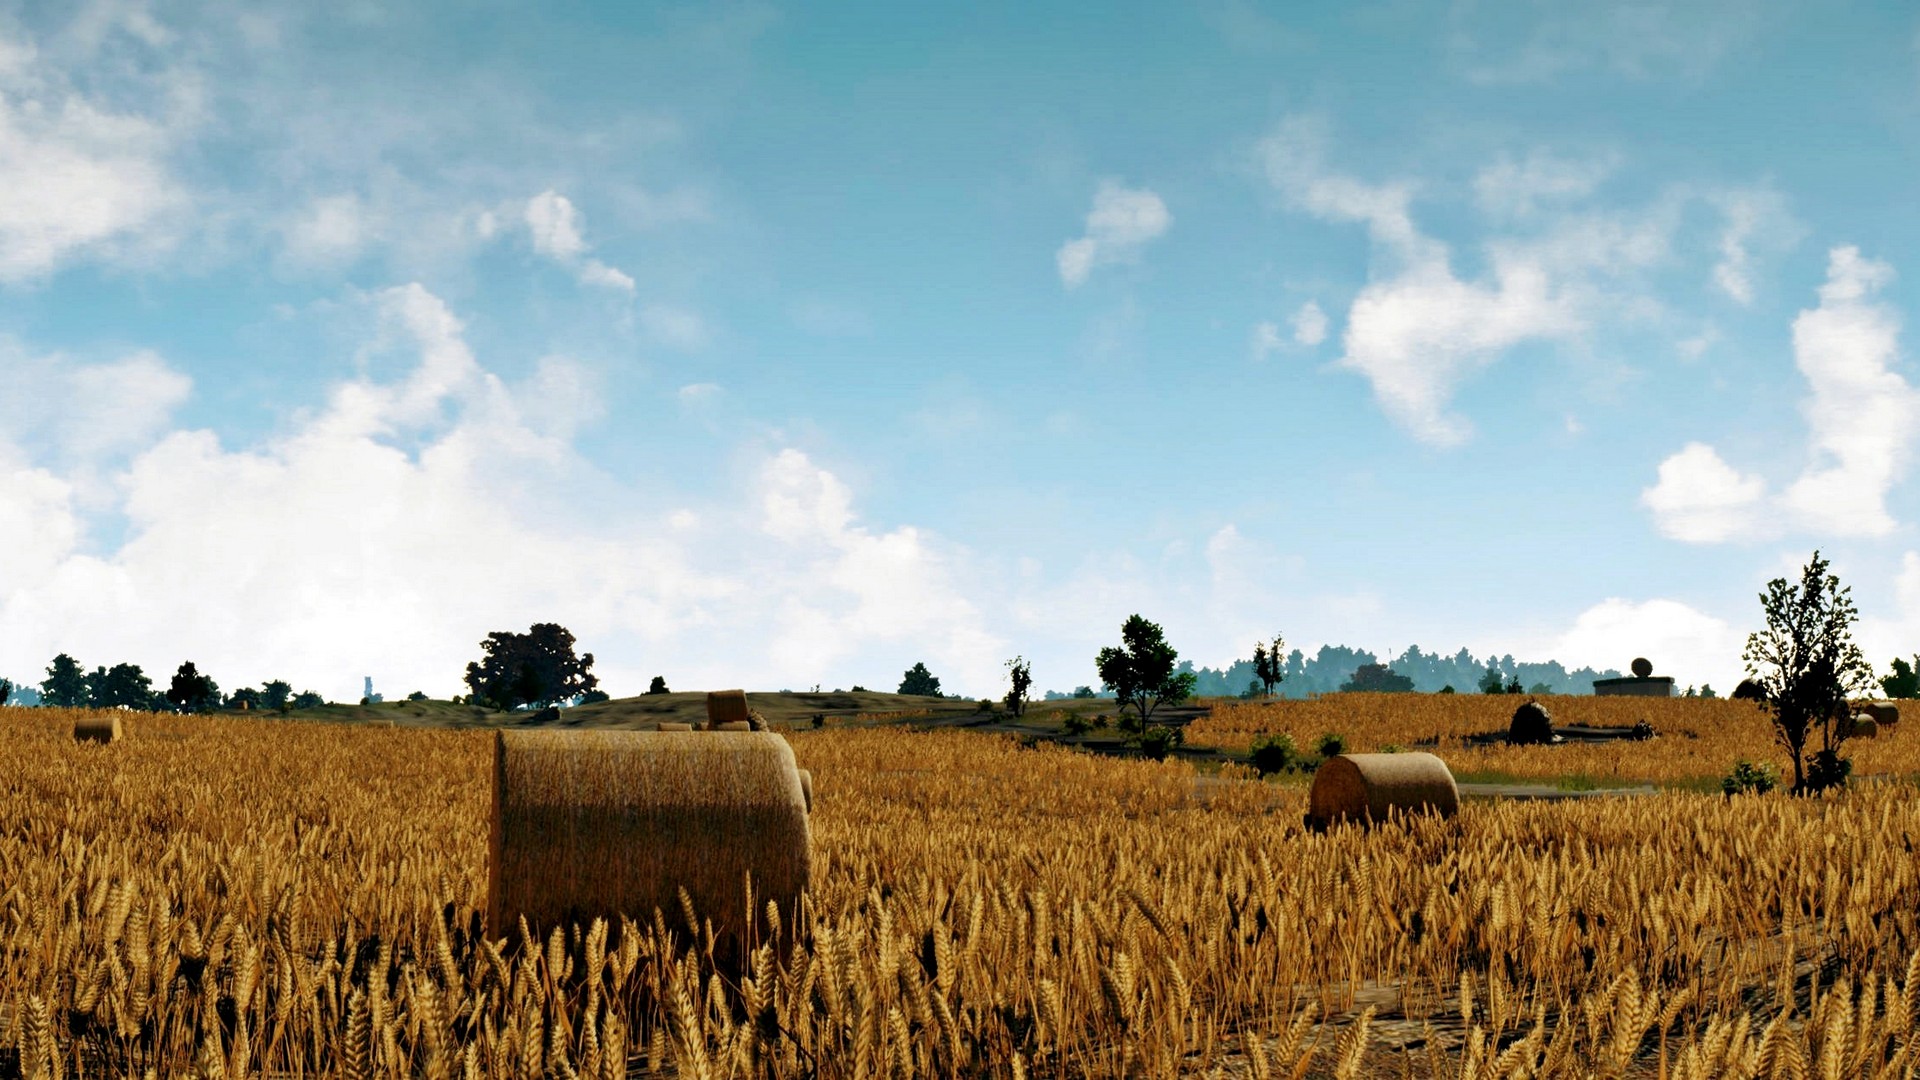 Wallpaper PUBG PC Desktop with image resolution 1920x1080 pixel. You can use this wallpaper as background for your desktop Computer Screensavers, Android or iPhone smartphones